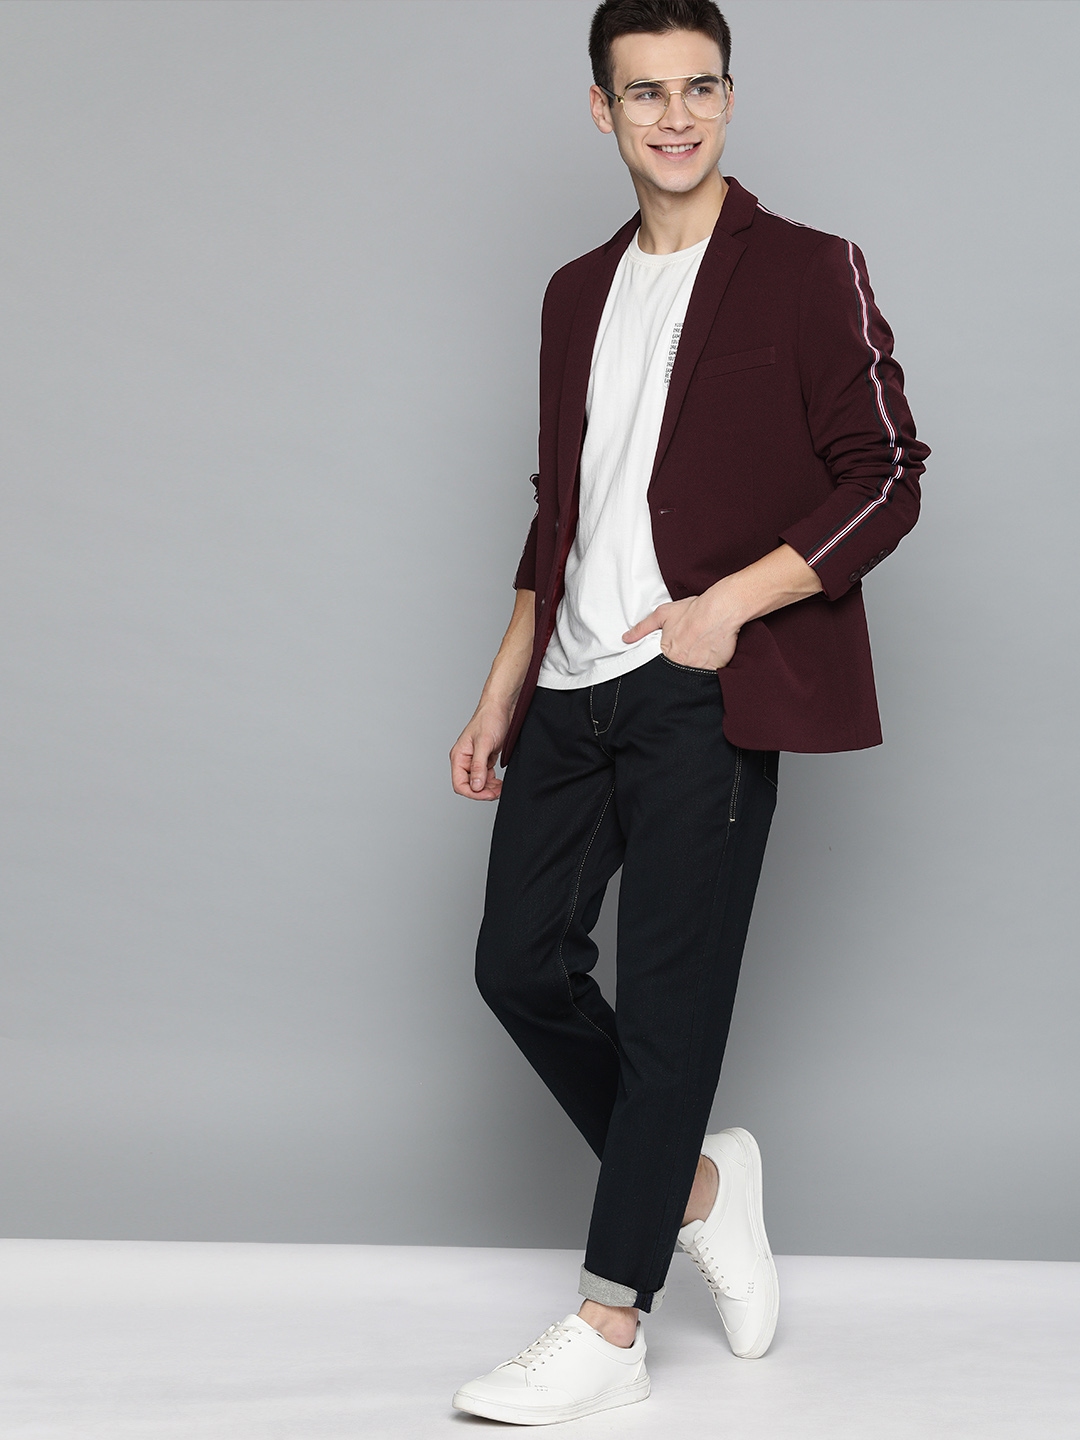 Buy Mast & Harbour Burgundy Regular Fit Single Breasted Casual ...